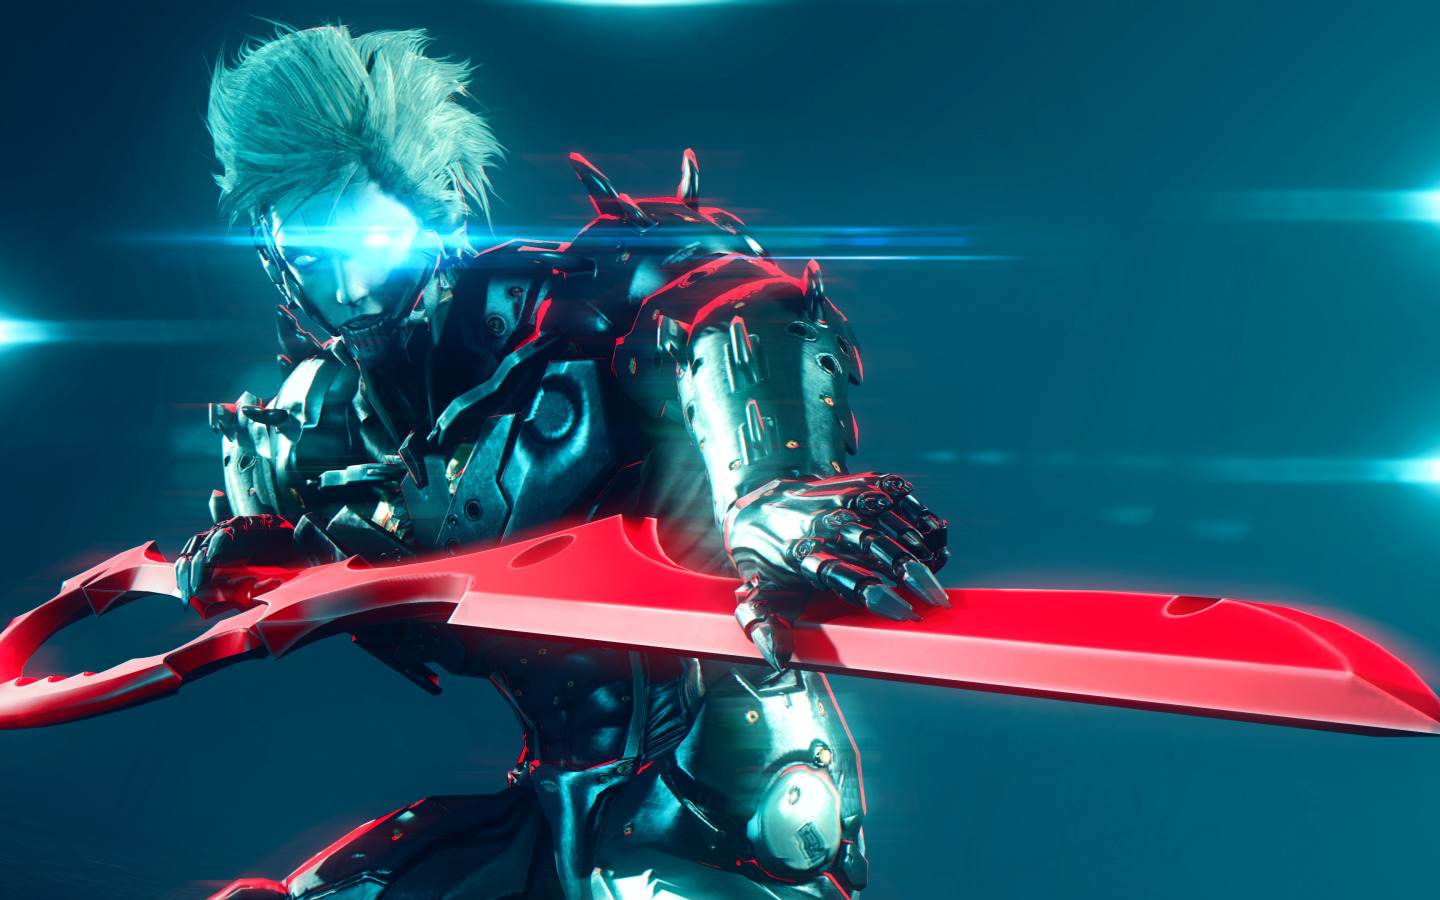 prompthunt: Metal Gear Rising Raiden slices a character from the game  genshin impact in two with his katana, 8K, UHD, photorealistic, shot on  Canon R6.